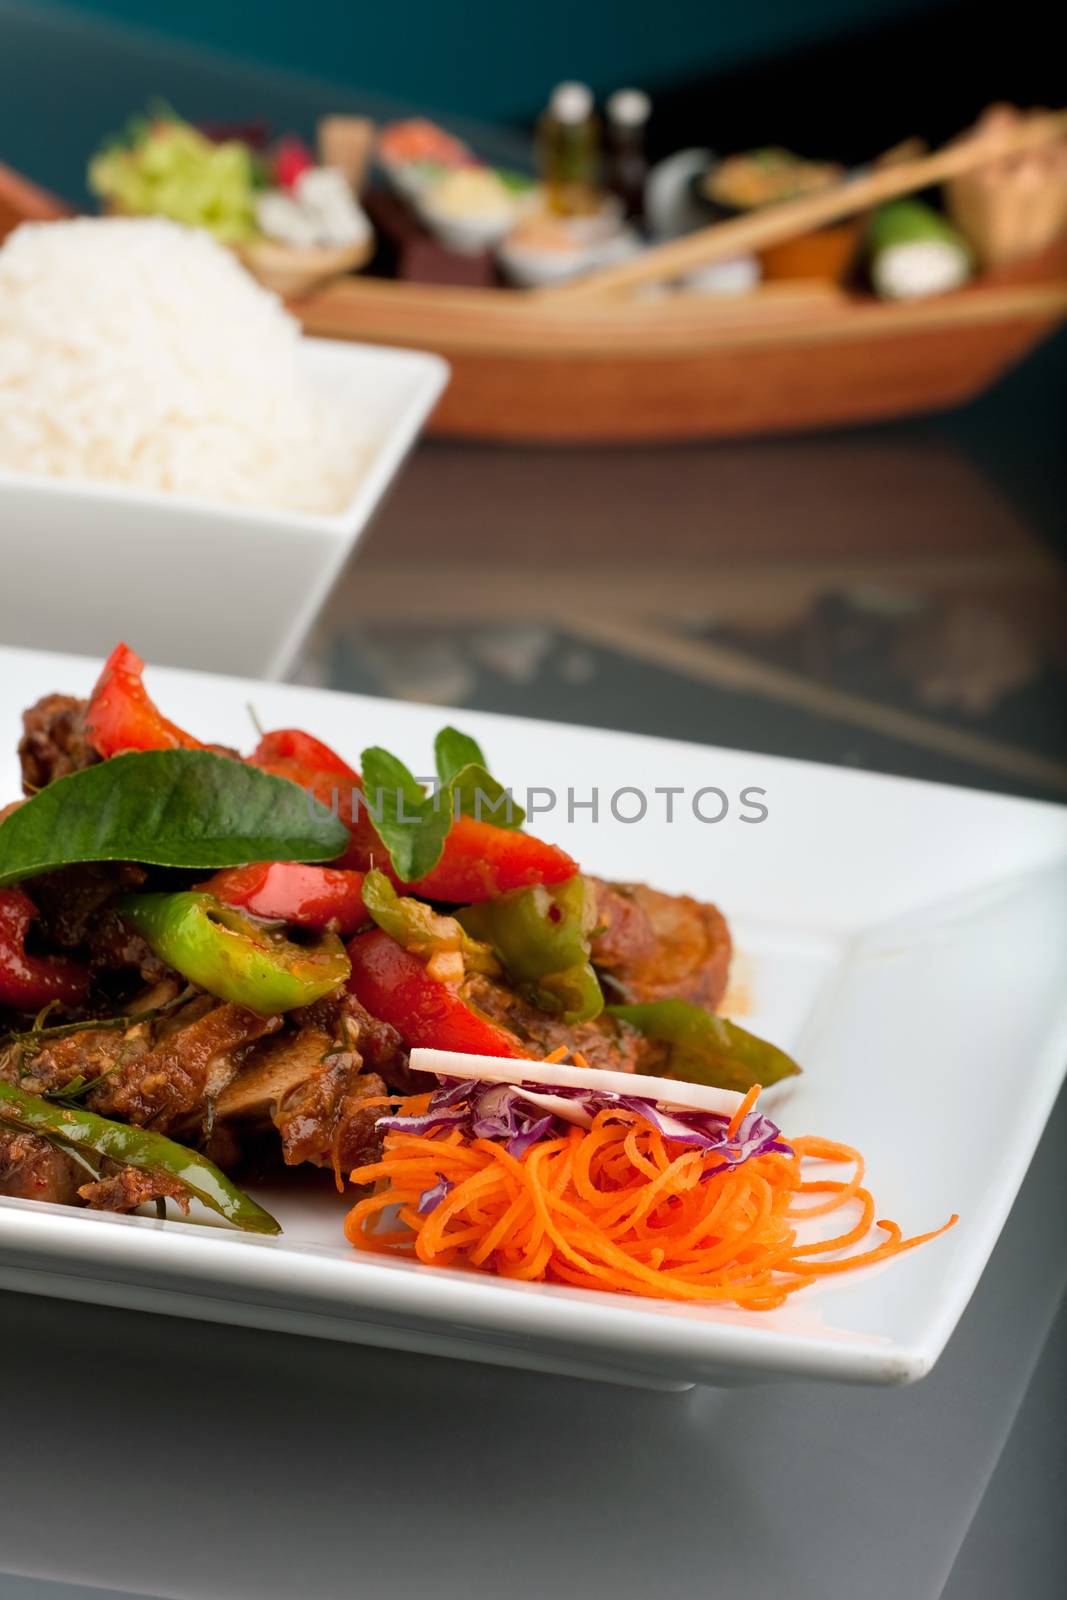 Thai Chile Basil Duck by graficallyminded